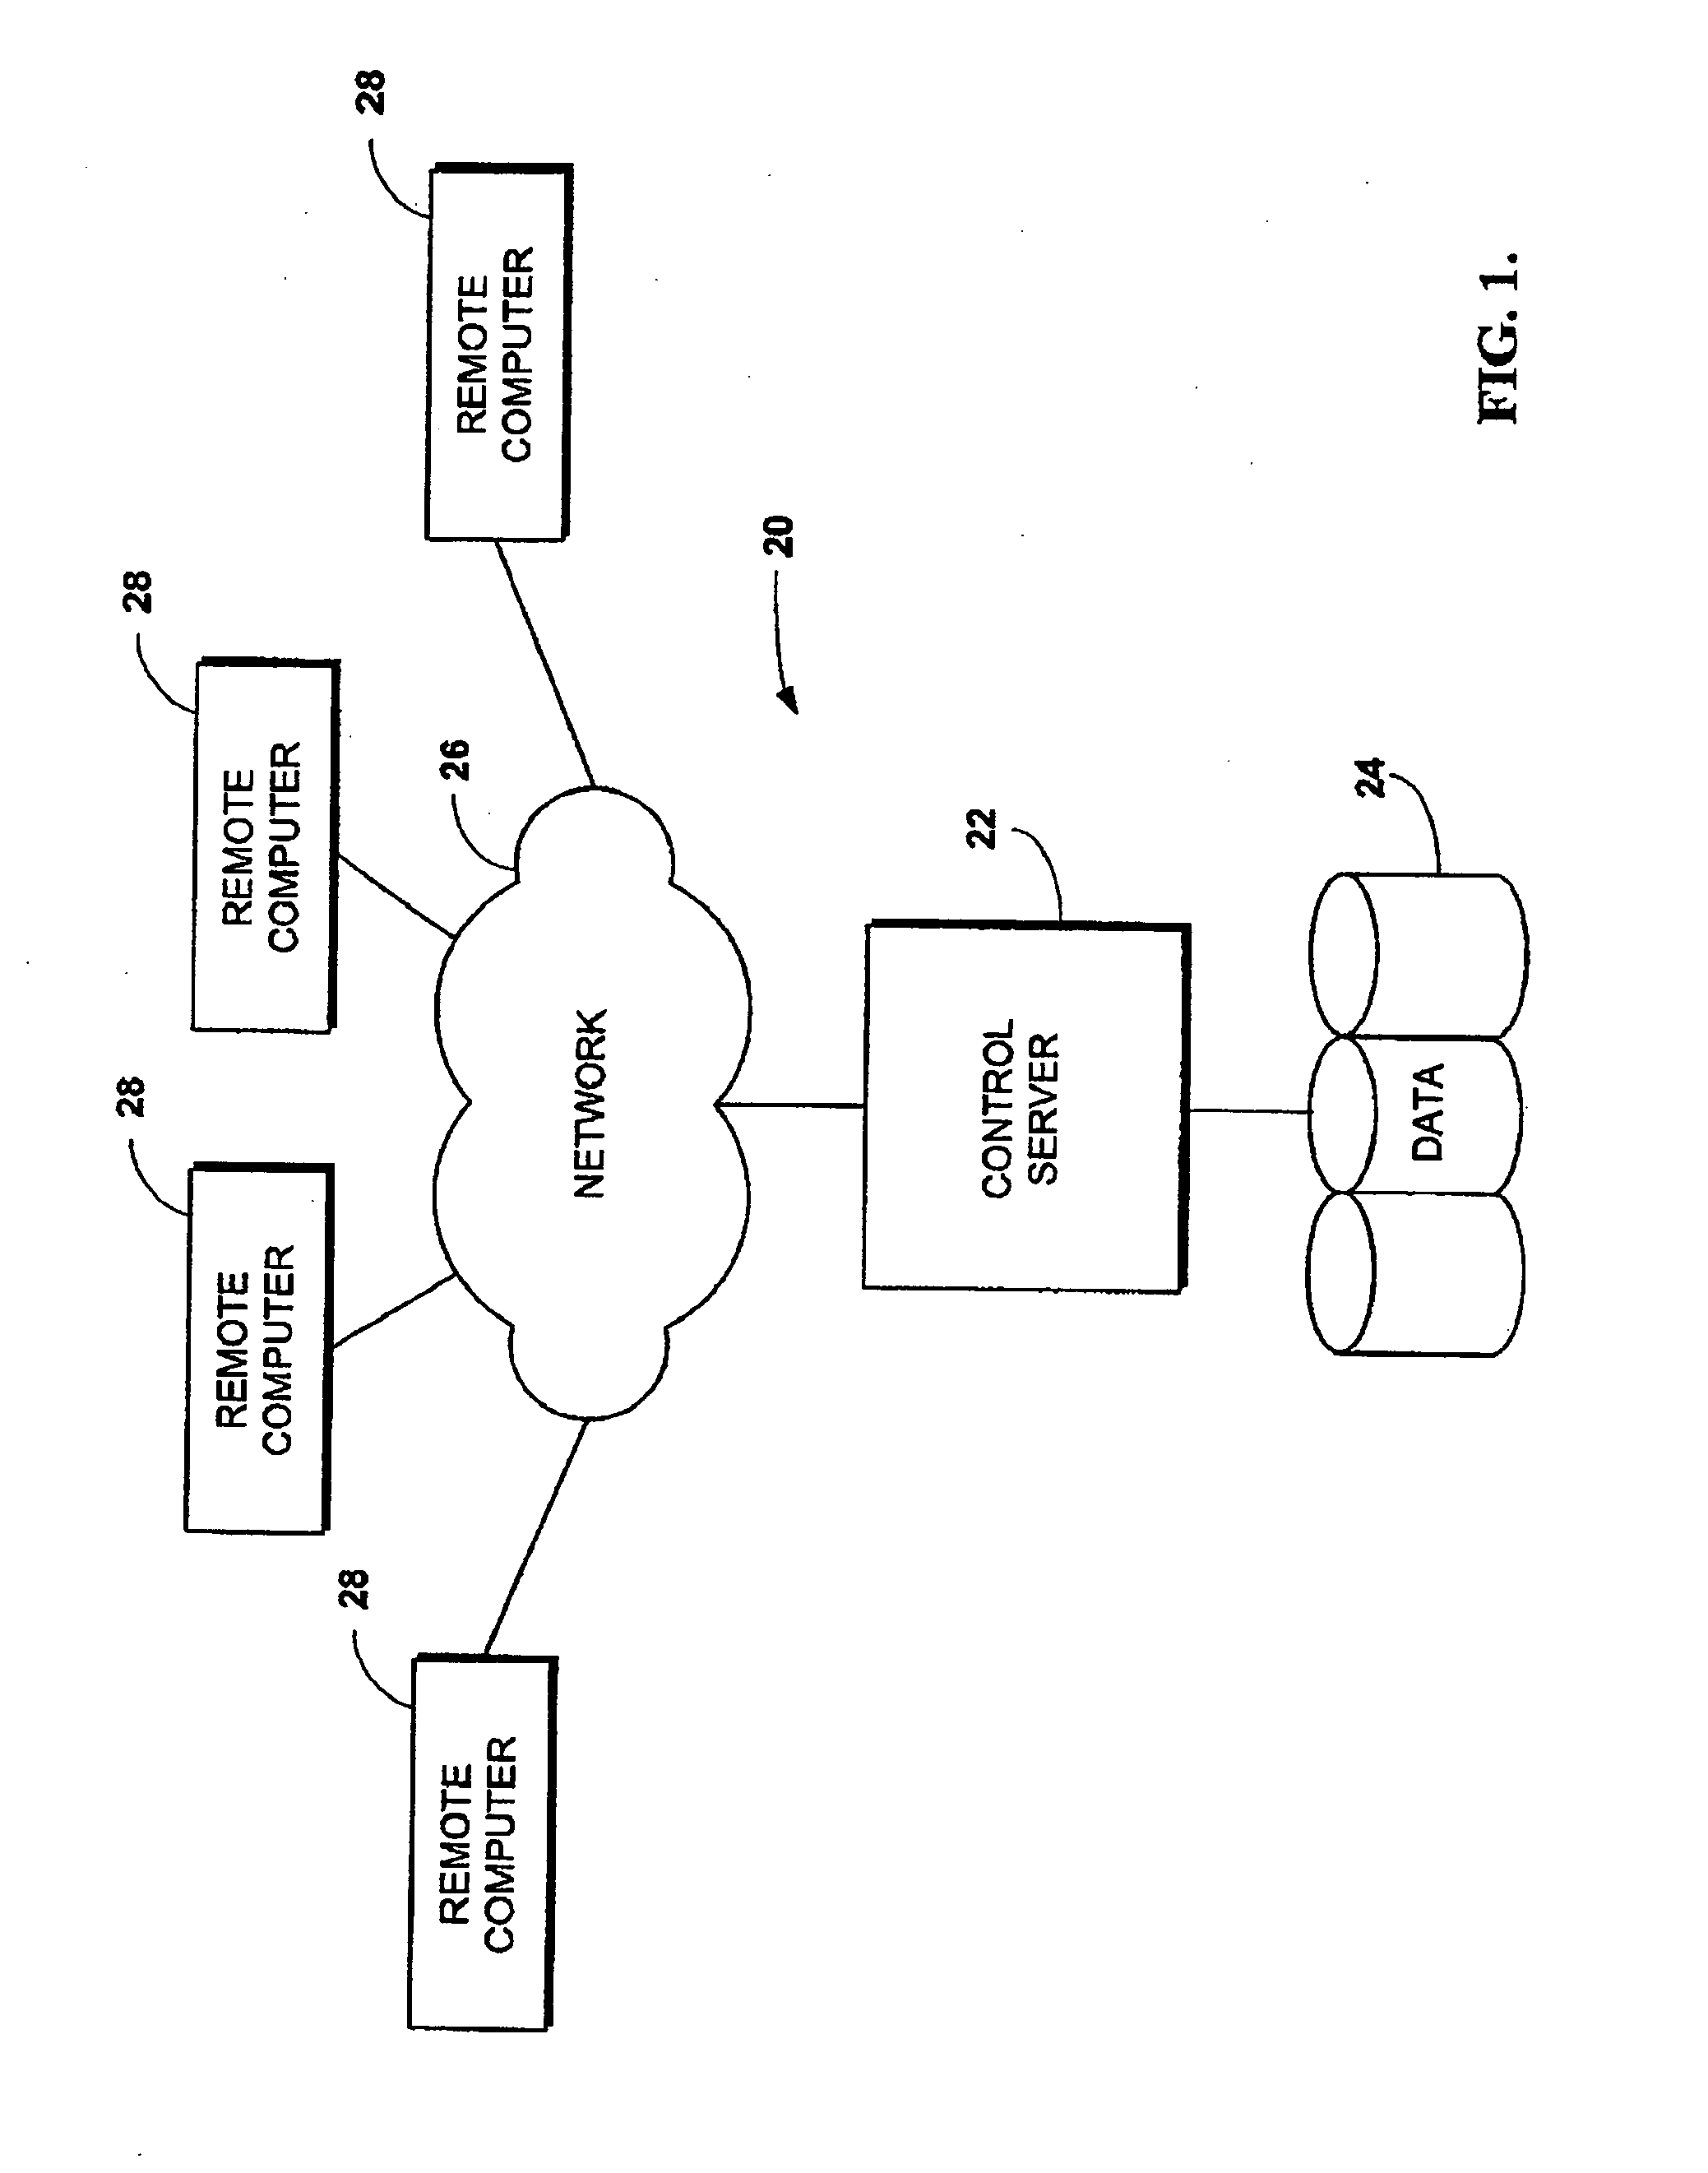 System and method in a computer system for managing a number of attachments associated with a patient